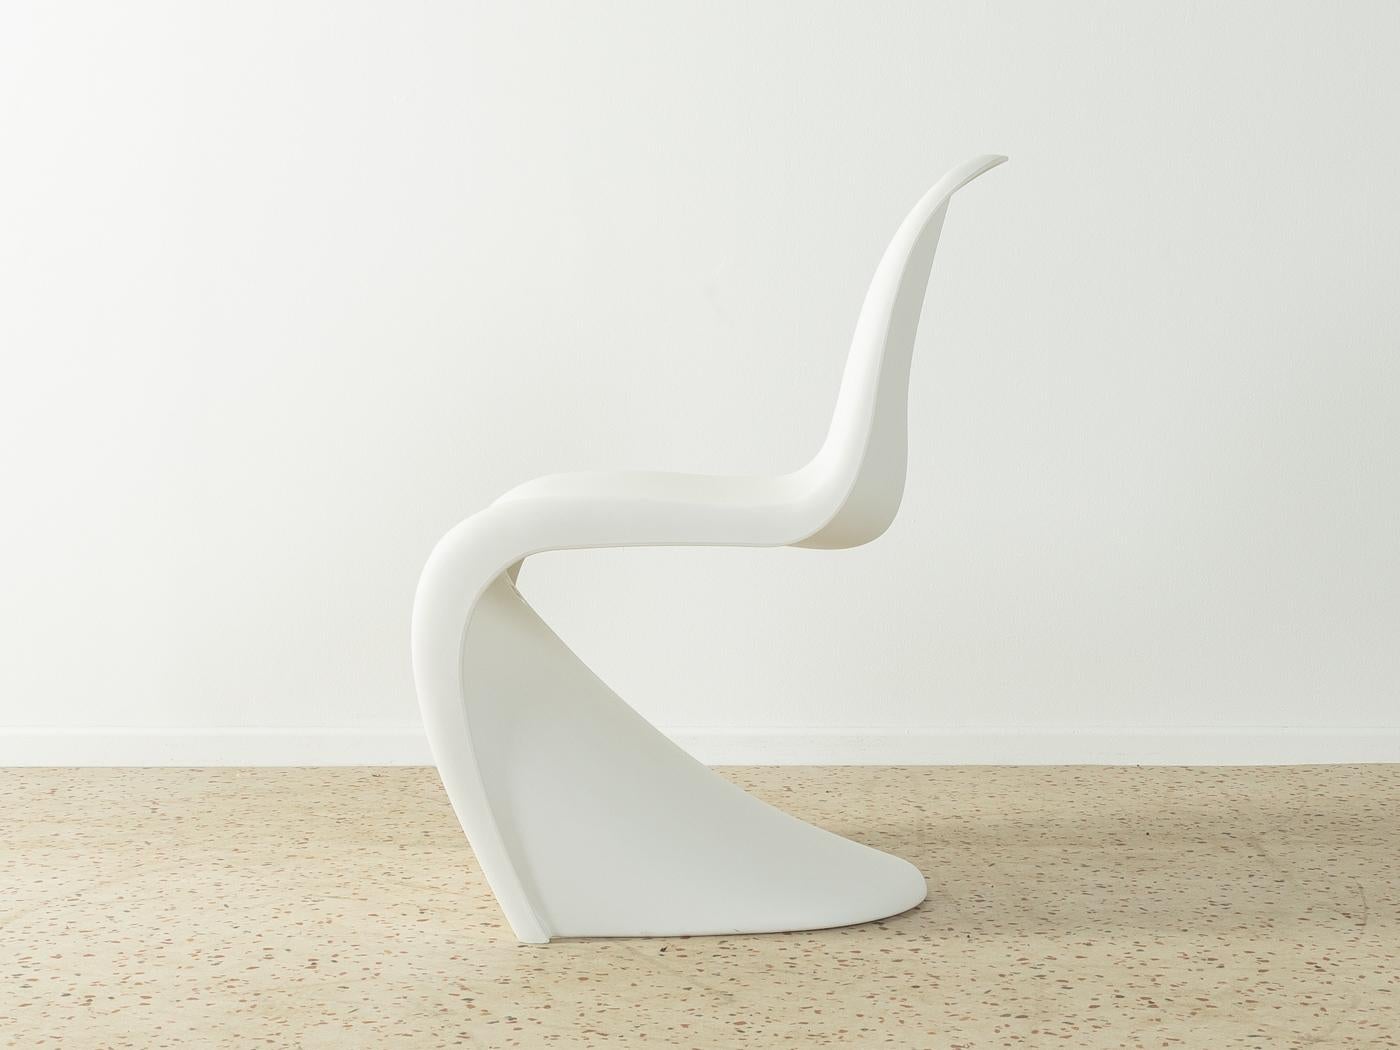 Timeless cantilever Panton Chair by Vitra made of high-quality polypropylene in white. Draft by Verner Panton in 1959.

Quality Features:
 accomplished design: perfect proportions and visible attention to detail
 high-quality workmanship using